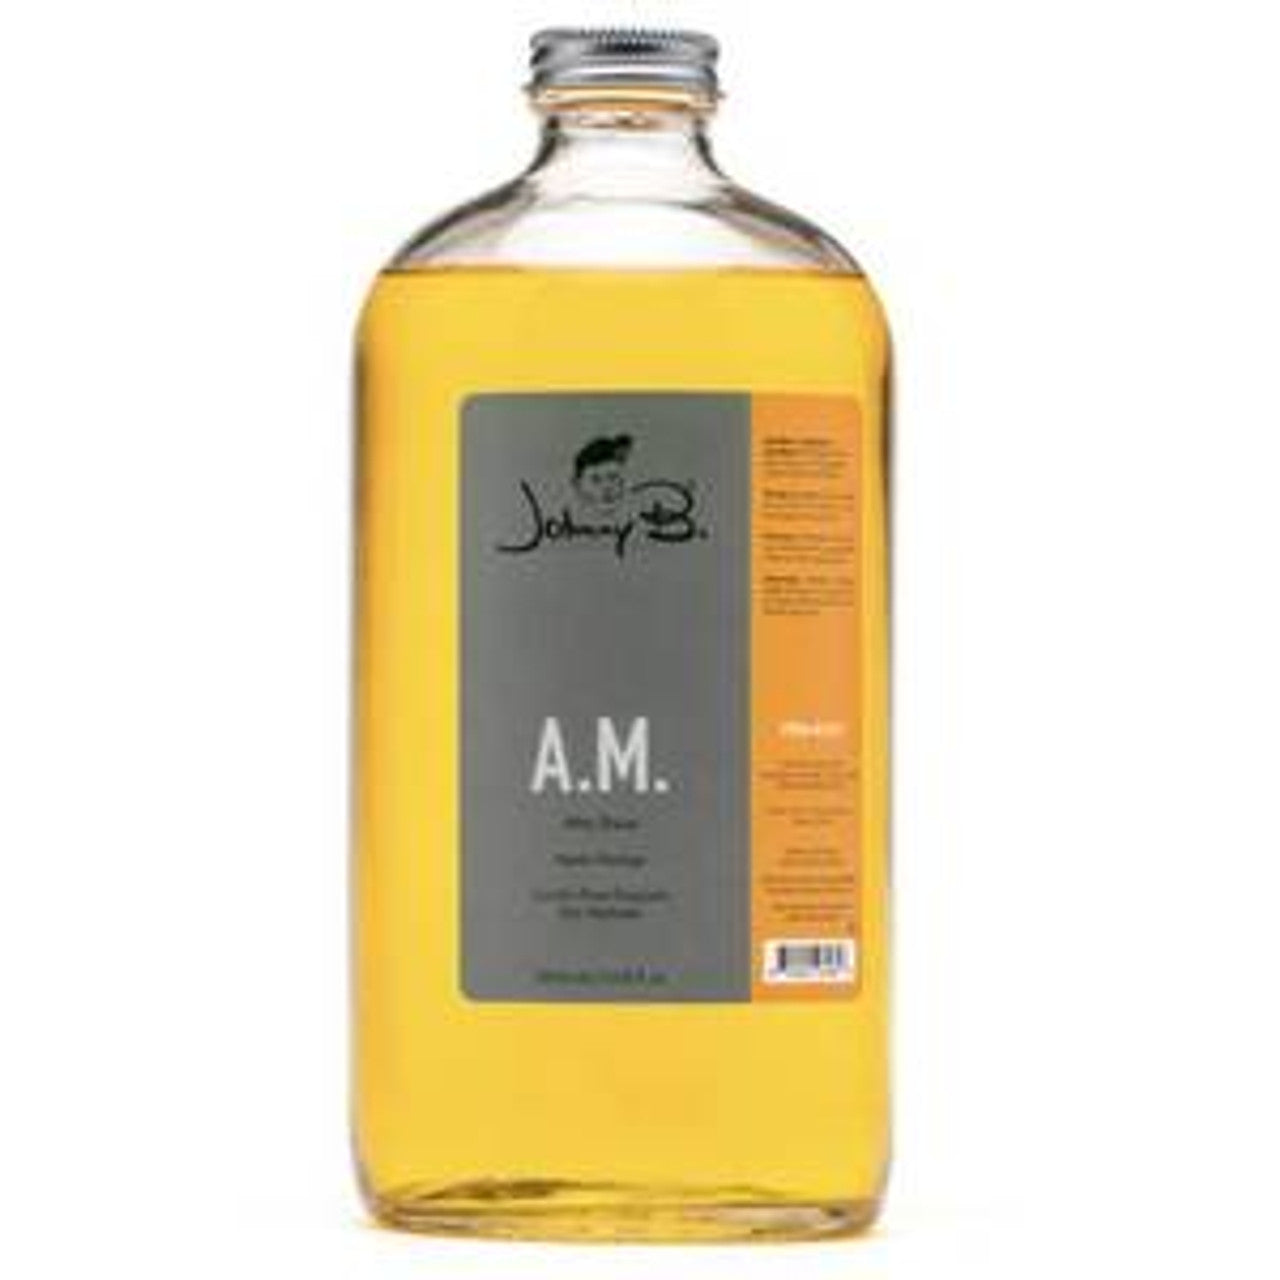 Johnny B Mode A.M. Aftershave - 32oz.